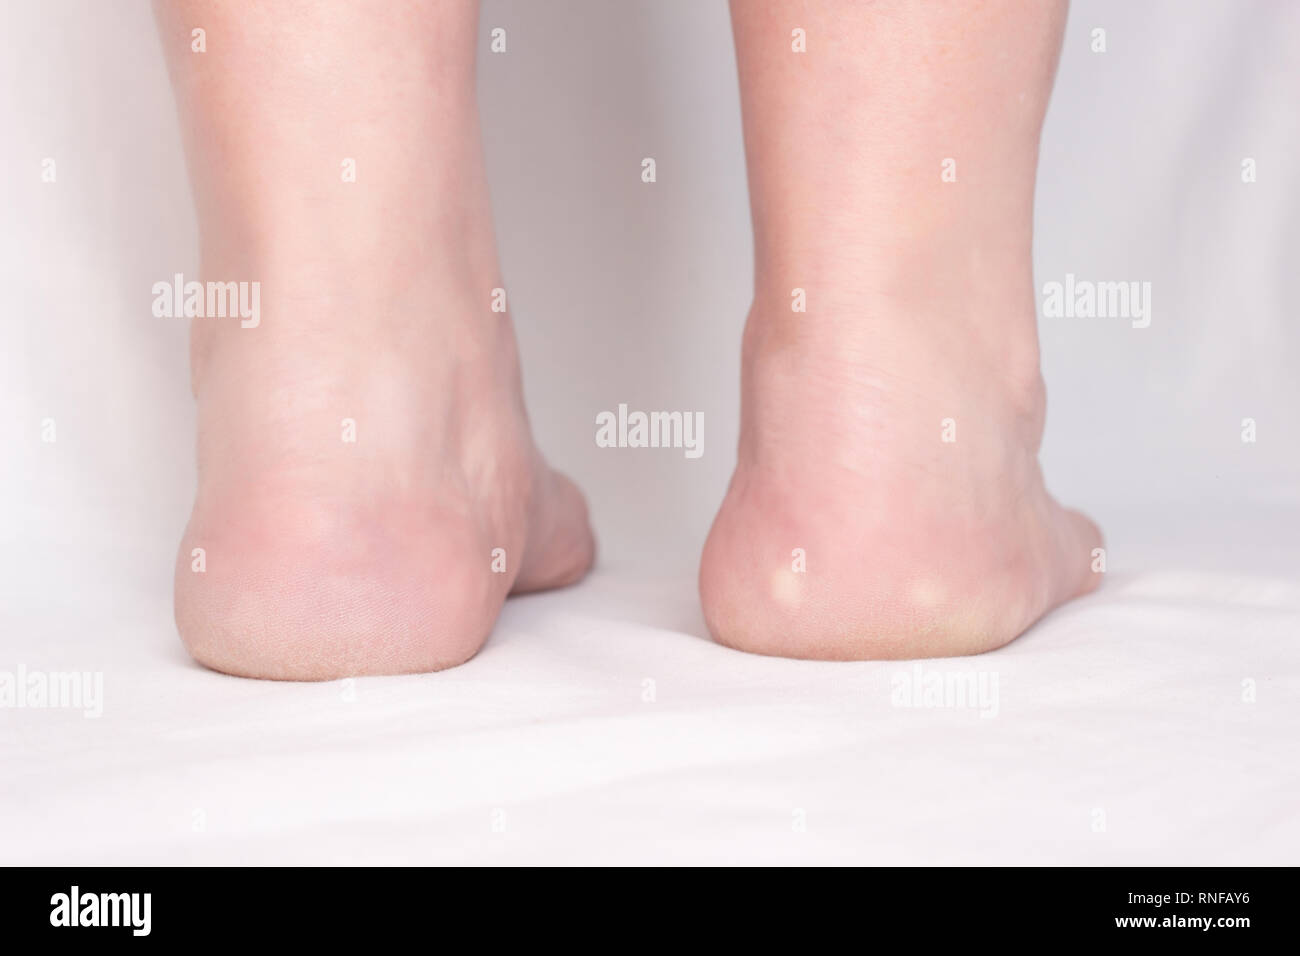 Female feet with spots on a white background with heel spur disease, close-up, plantar fasciitis, osteophyte, inflammation Stock Photo